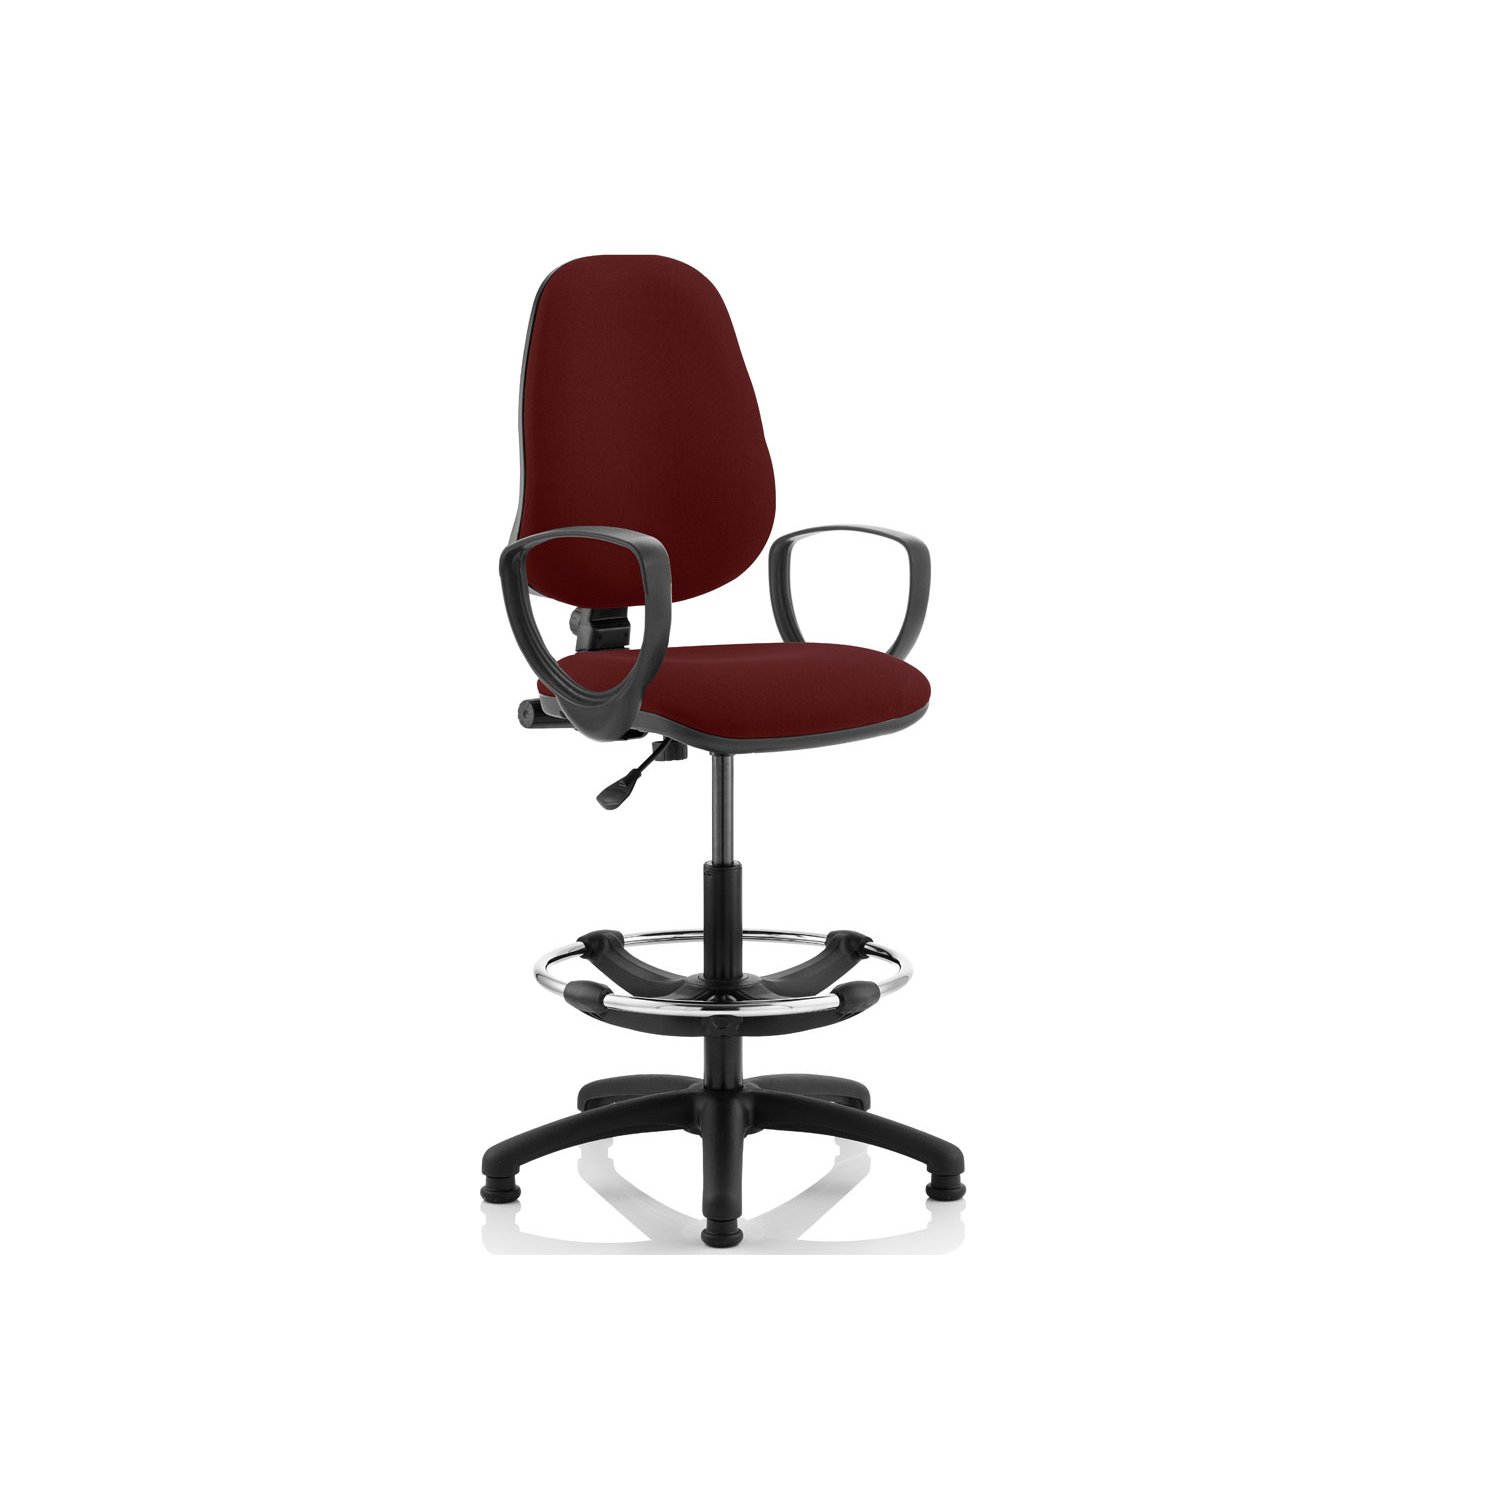 Lunar 1 Lever Draughtsman Chair (Fixed Arms), Ginseng Chilli